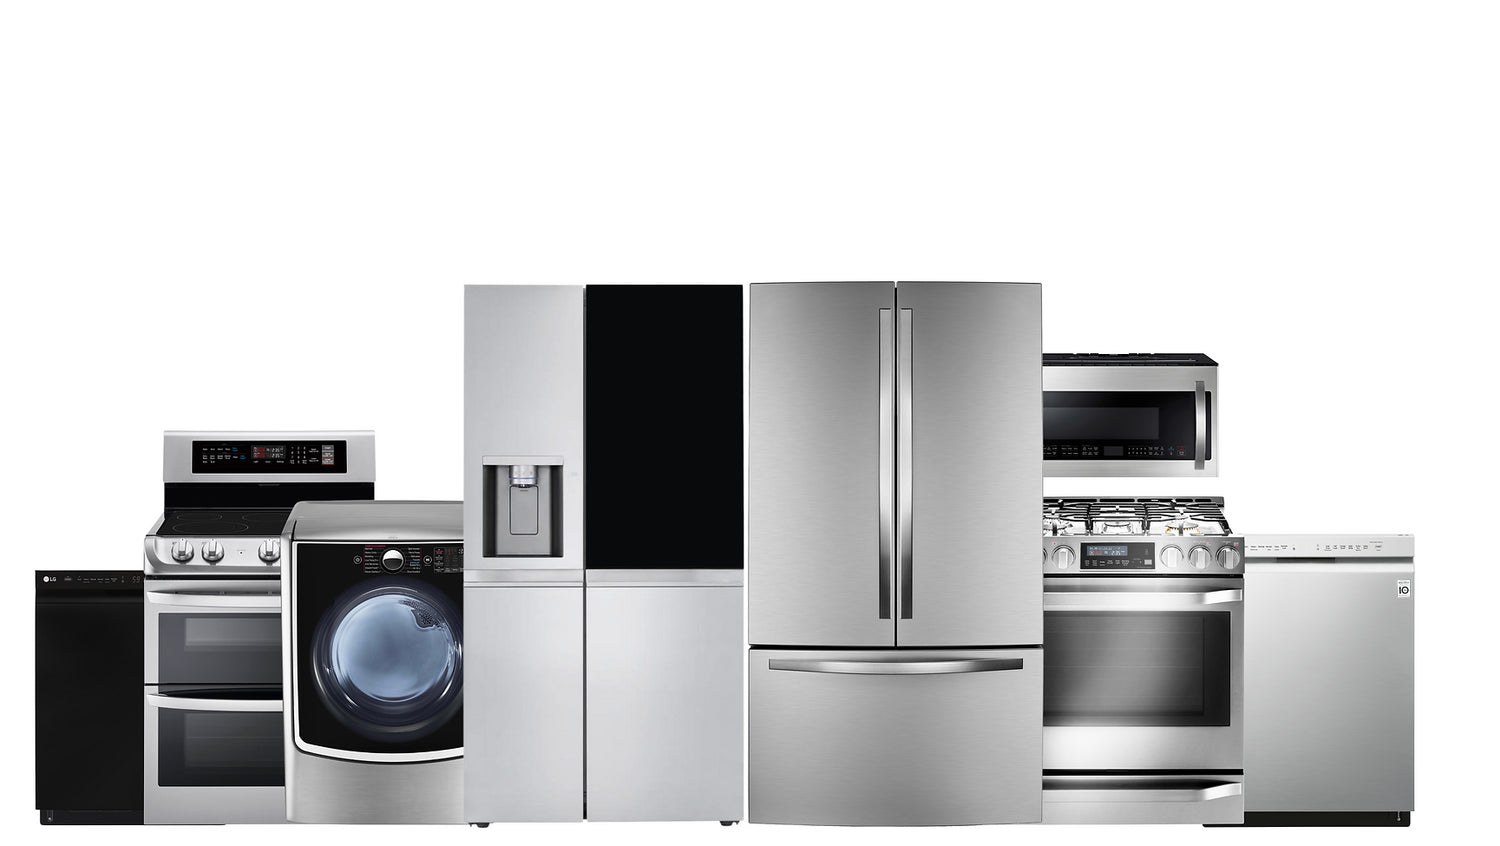 Discount Appliances, Appliances 4 Less, Scratch and dent appliances, discount refrigerator, washer, dryer, dishwasher, oven, range, gas dyer, gas range, microwave, top quality and warranty service